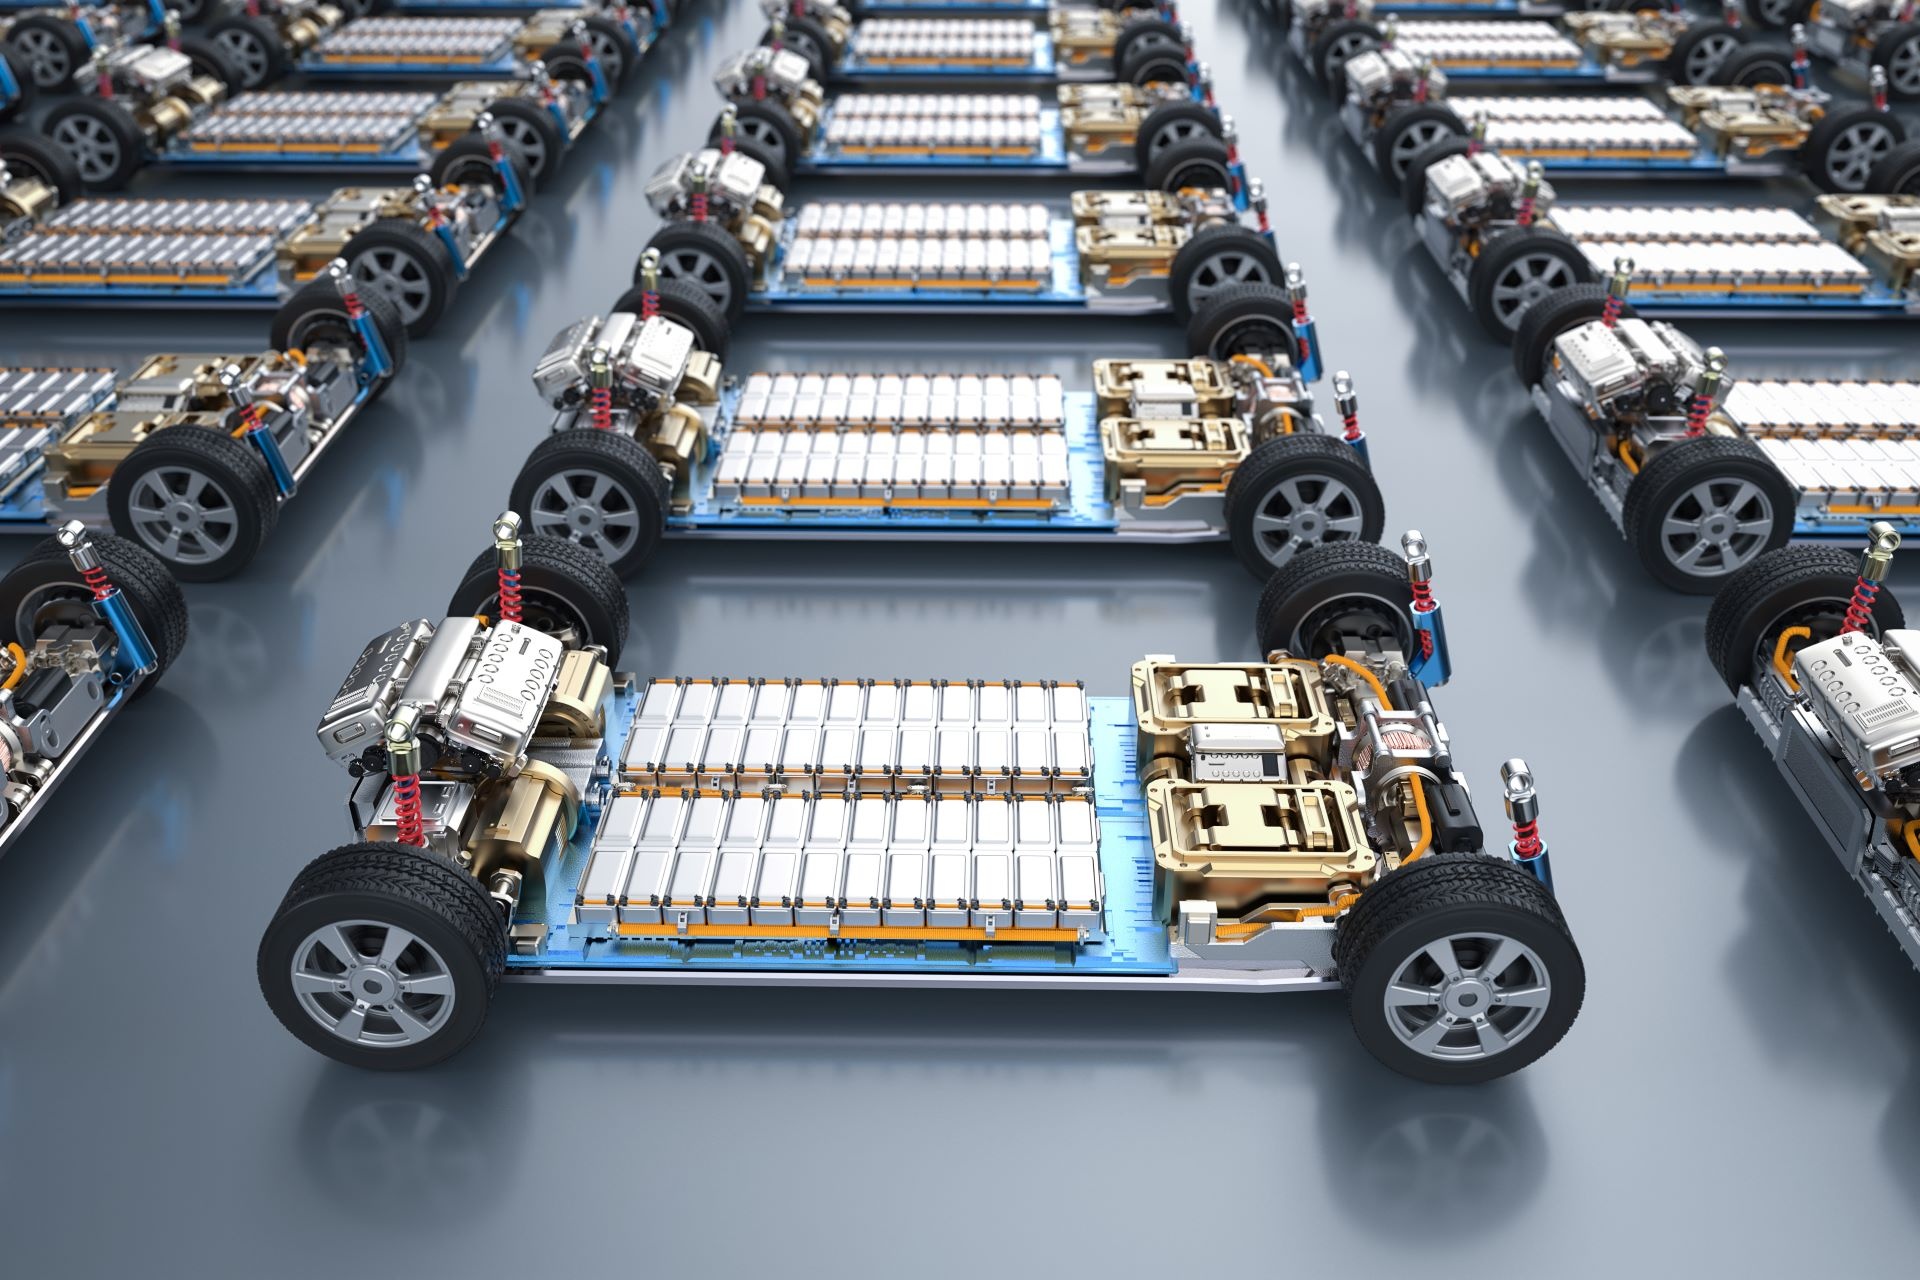 Silicon anode batteries could increase an EV's range by tenfold